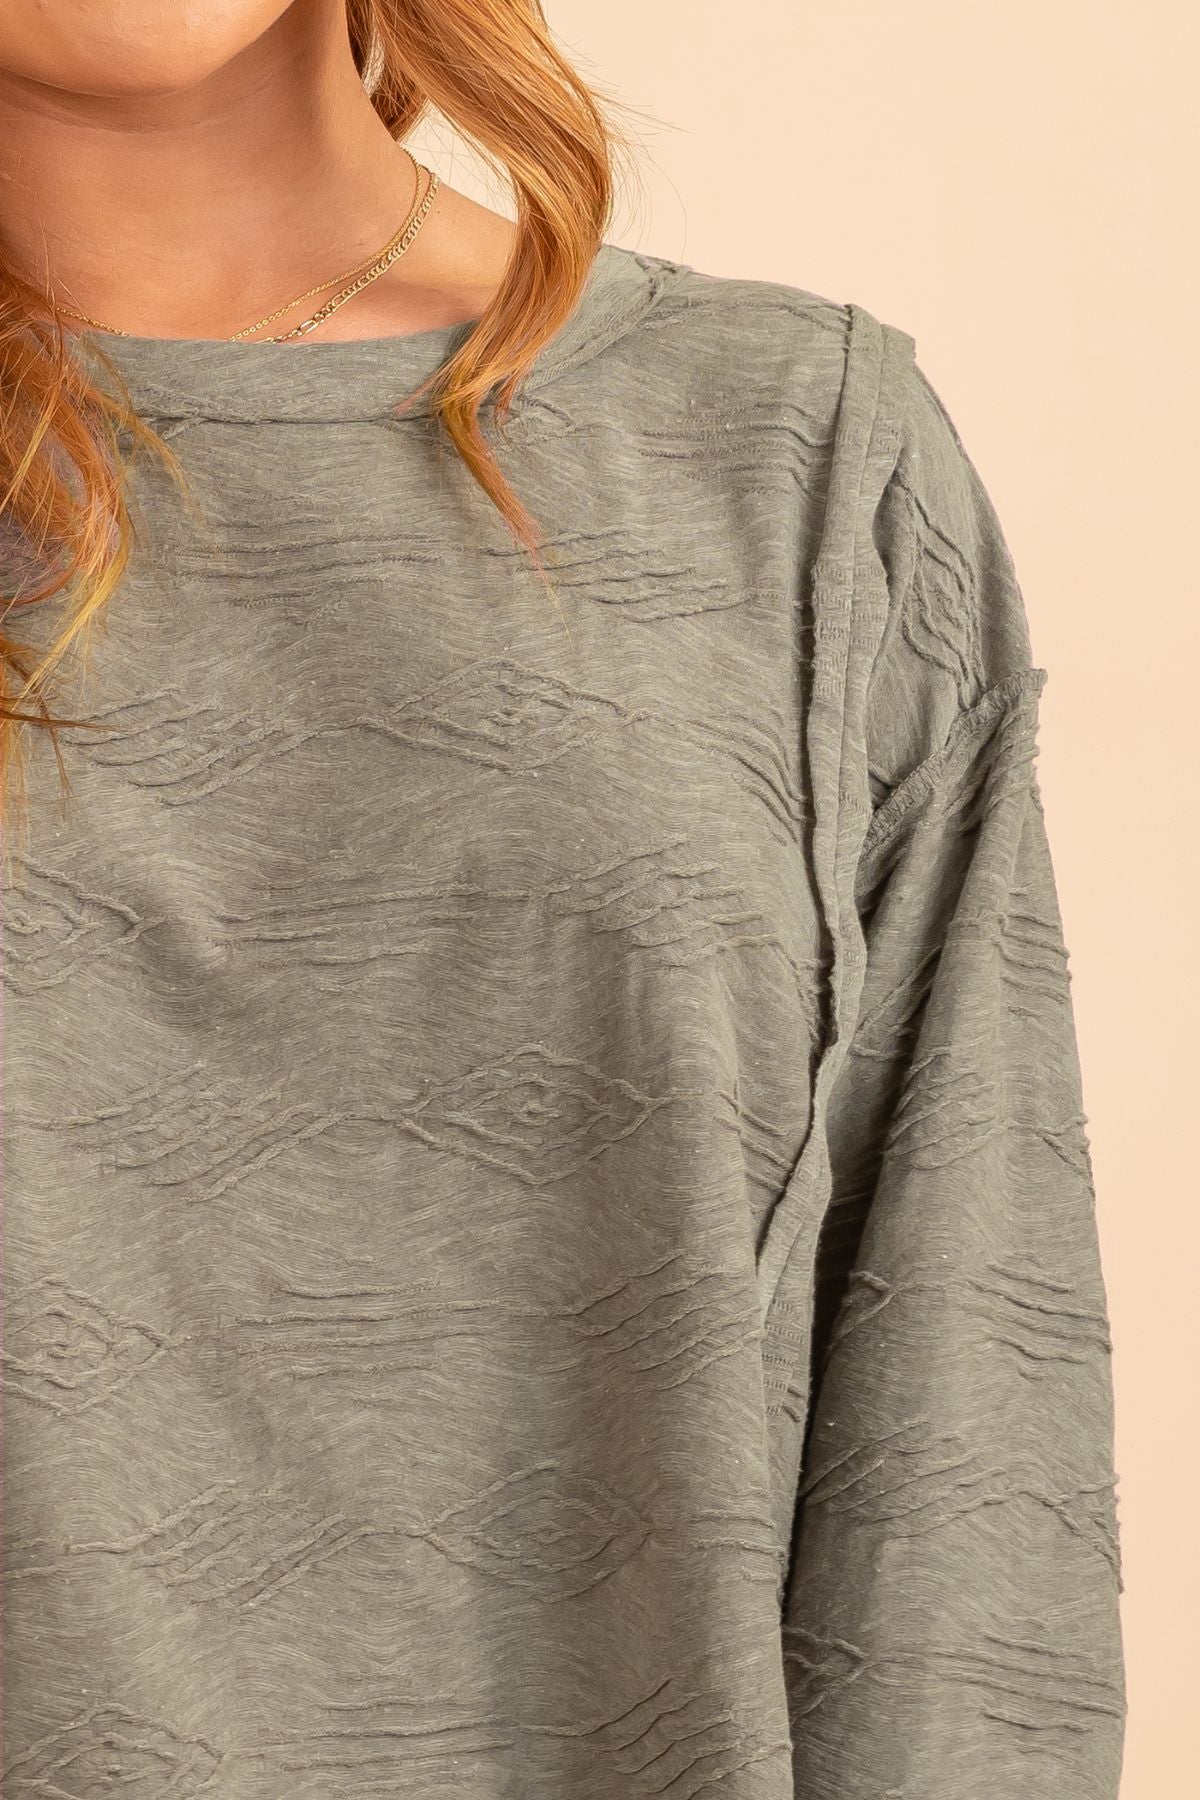 Textured gray womans long sleeve top